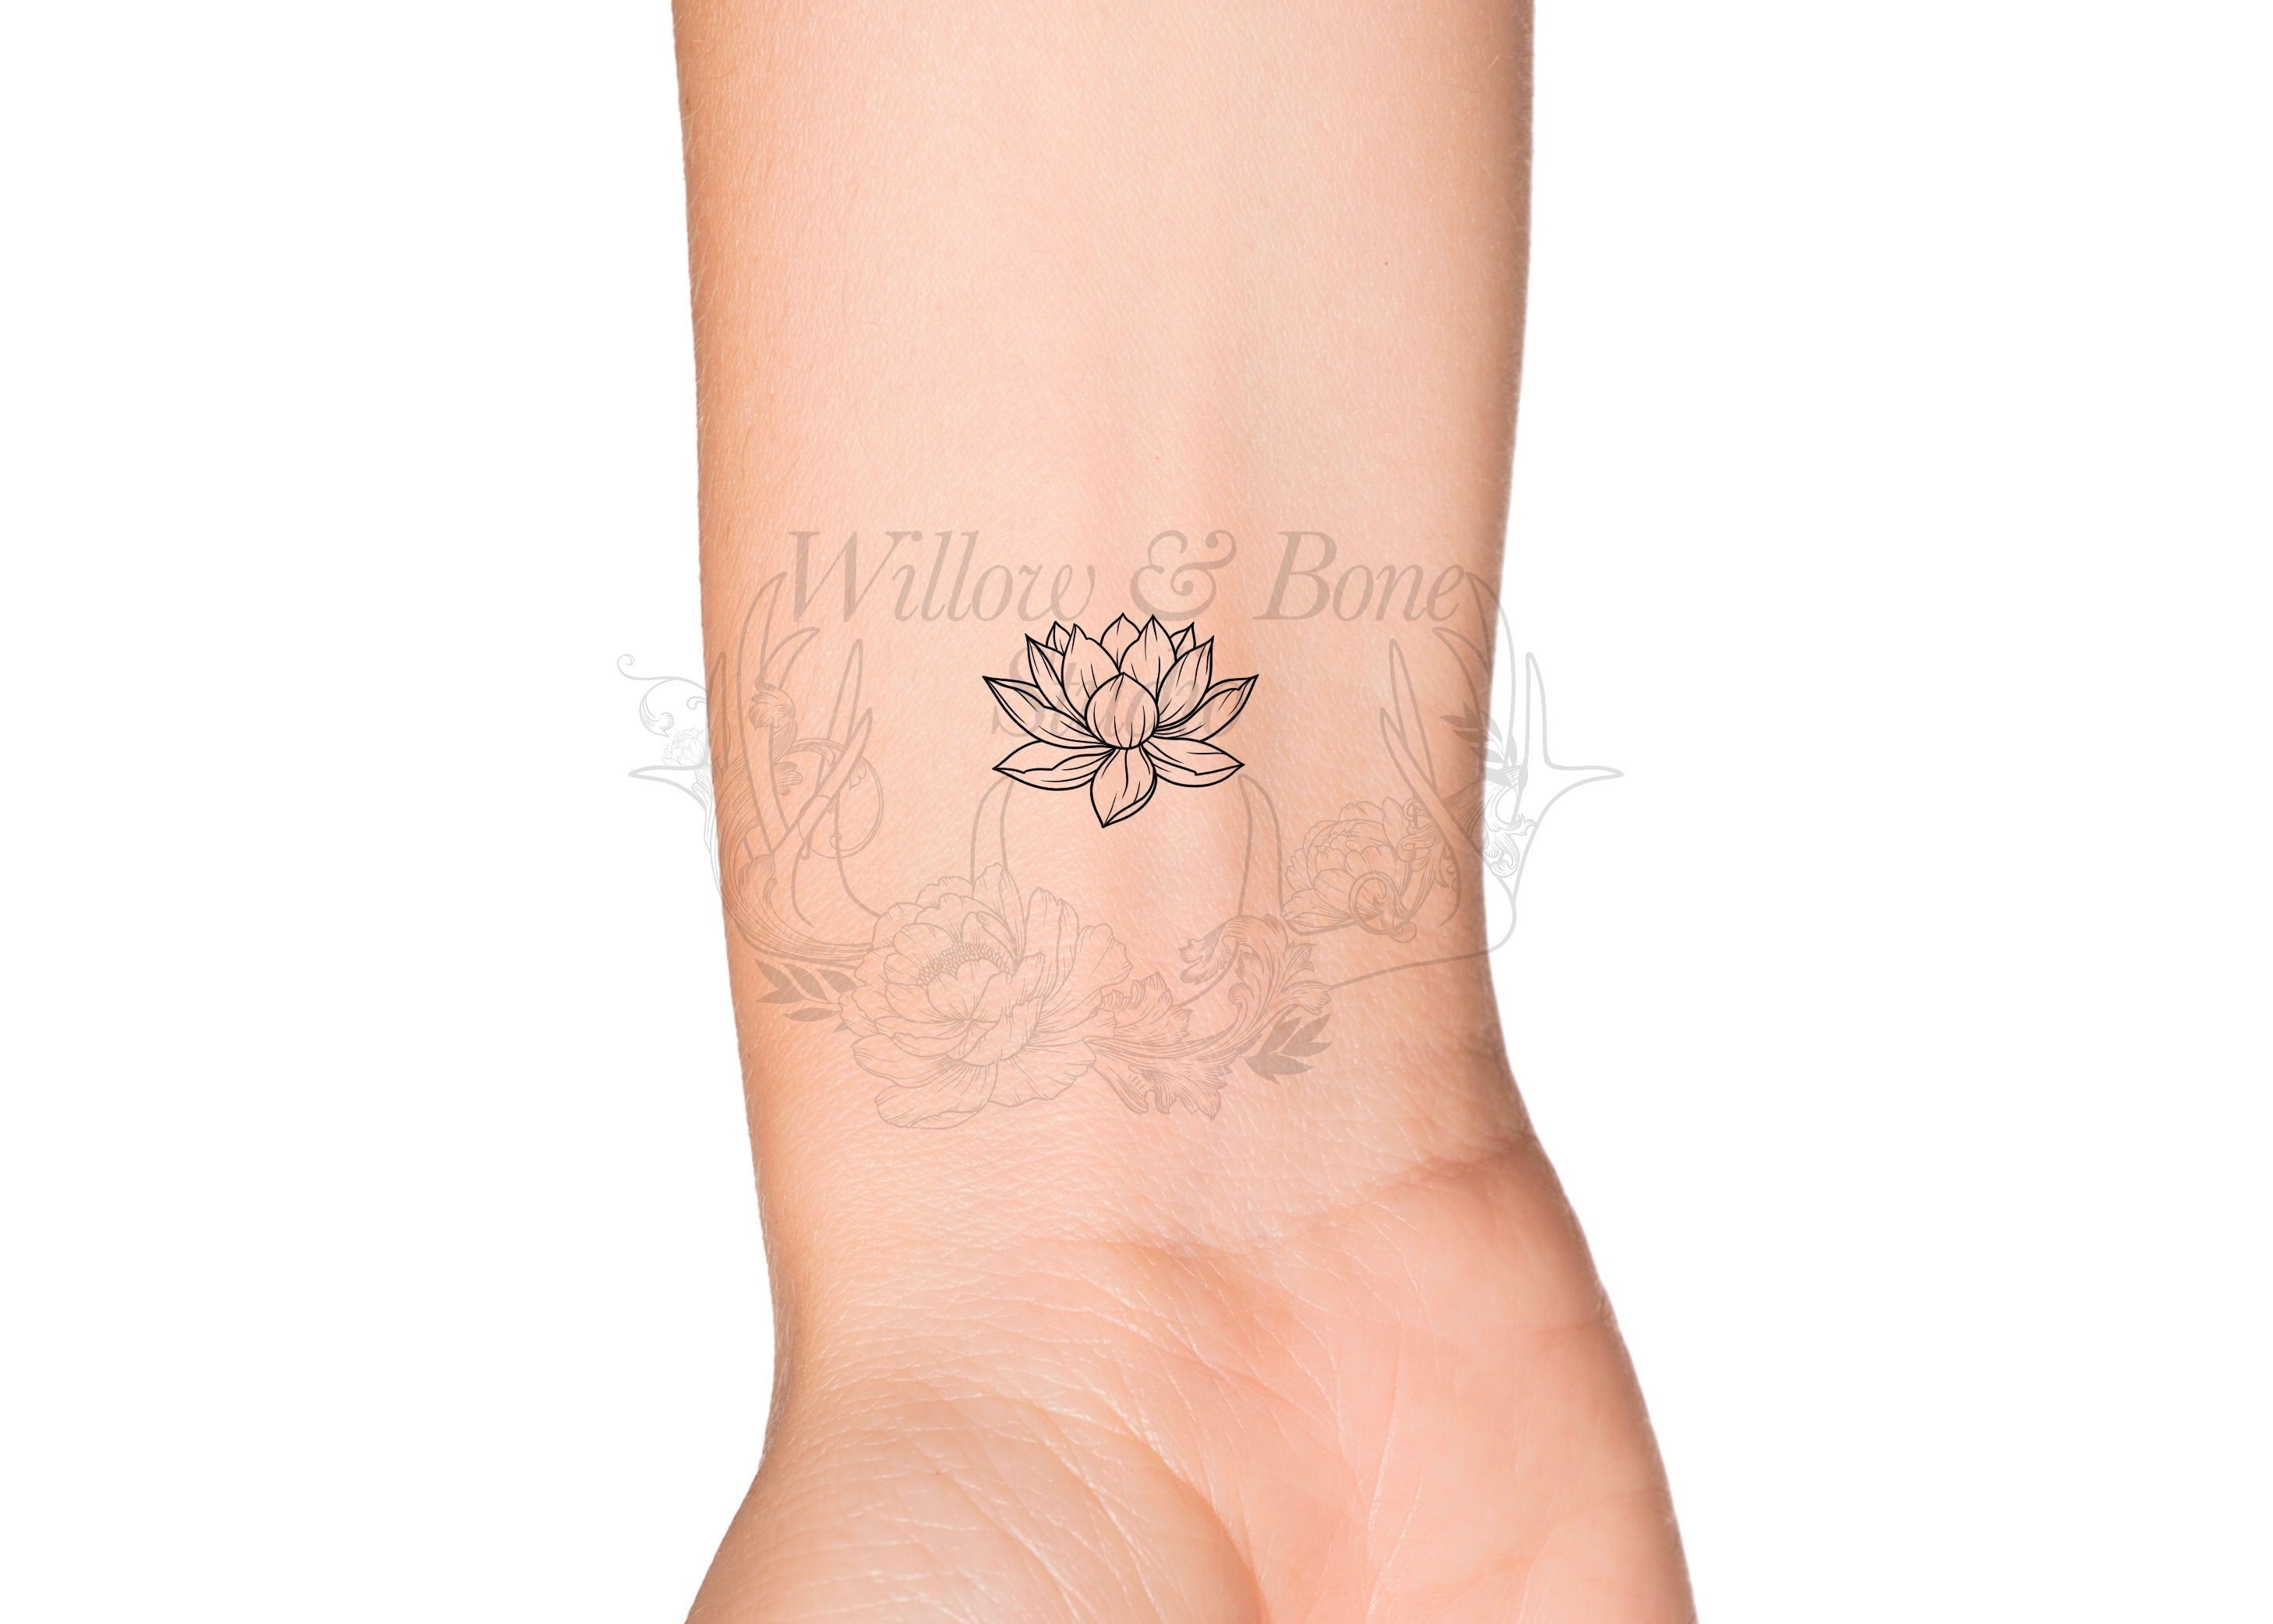 Water Lily Tattoo - Etsy